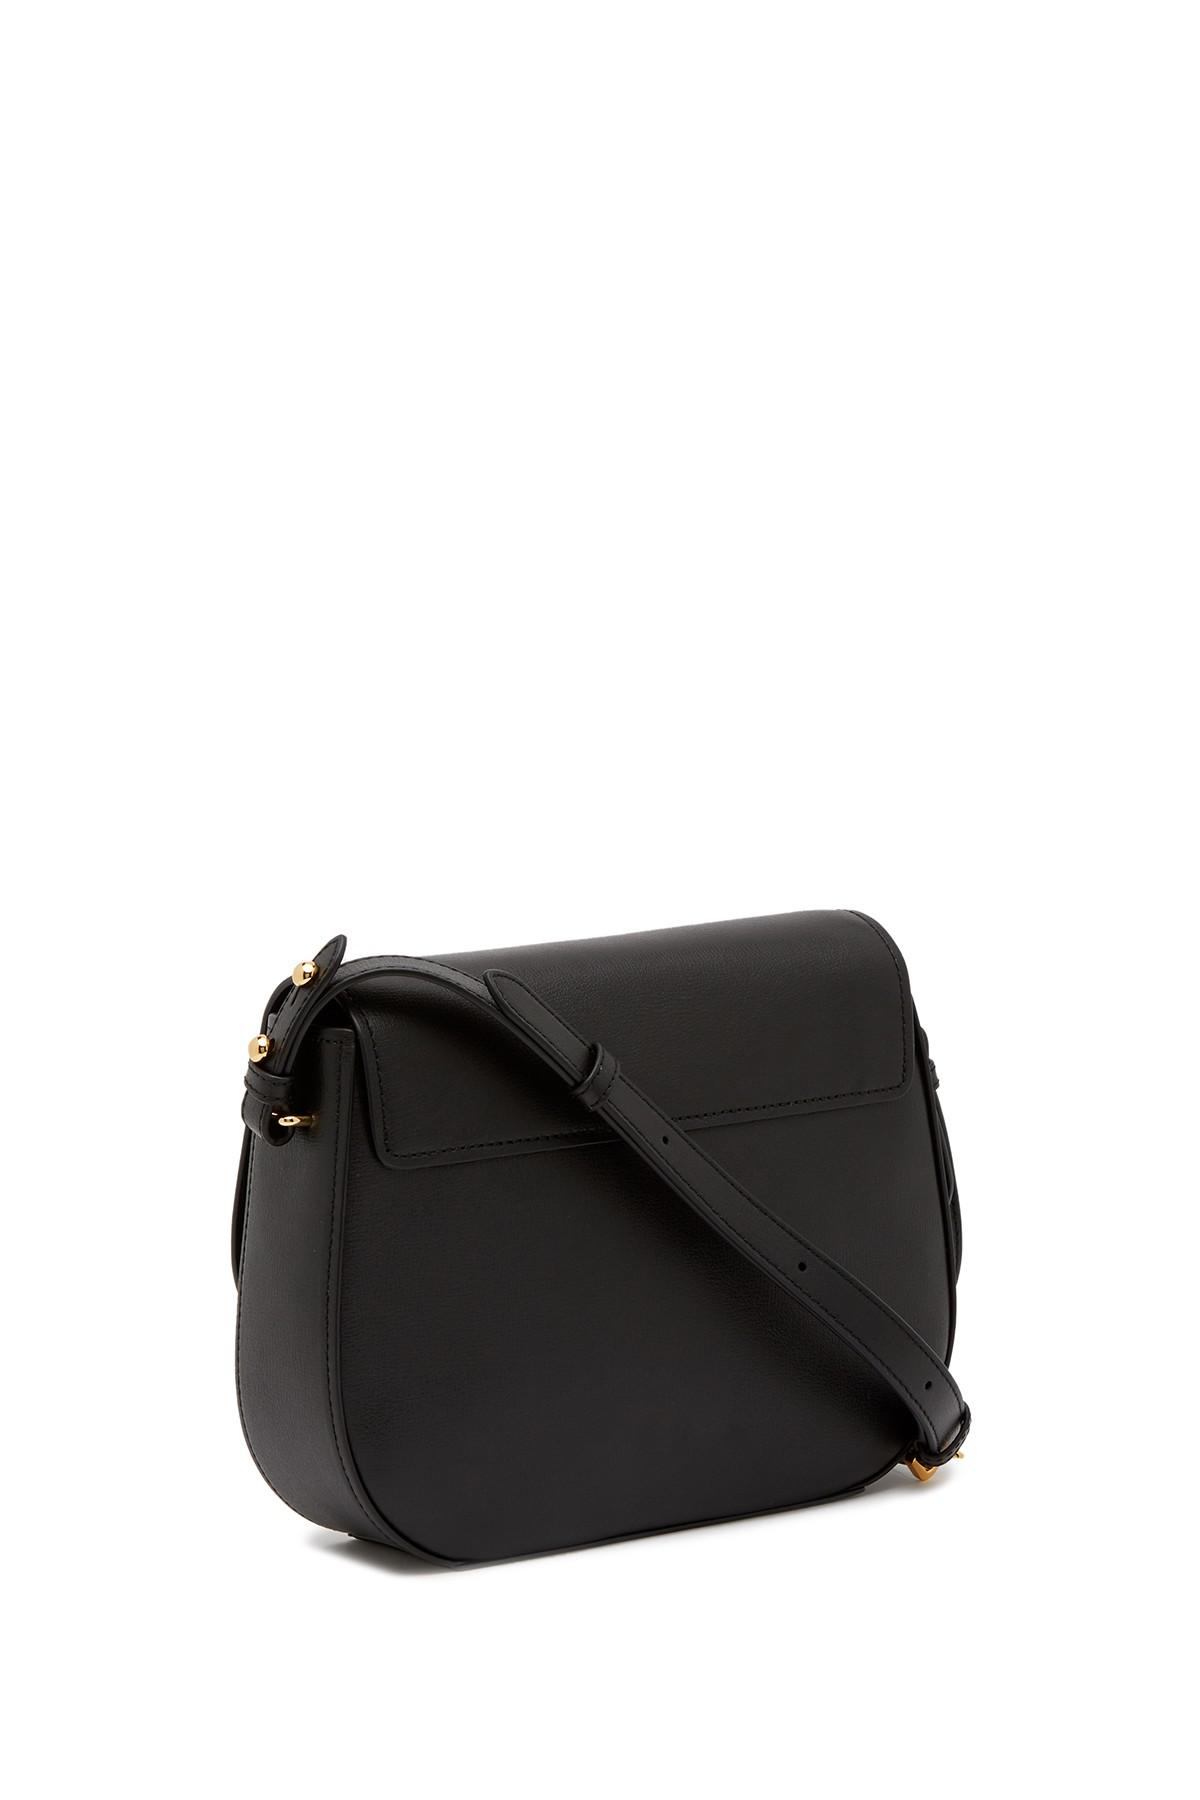 Leather crossbody bag Marc Jacobs Black in Leather - 37282396